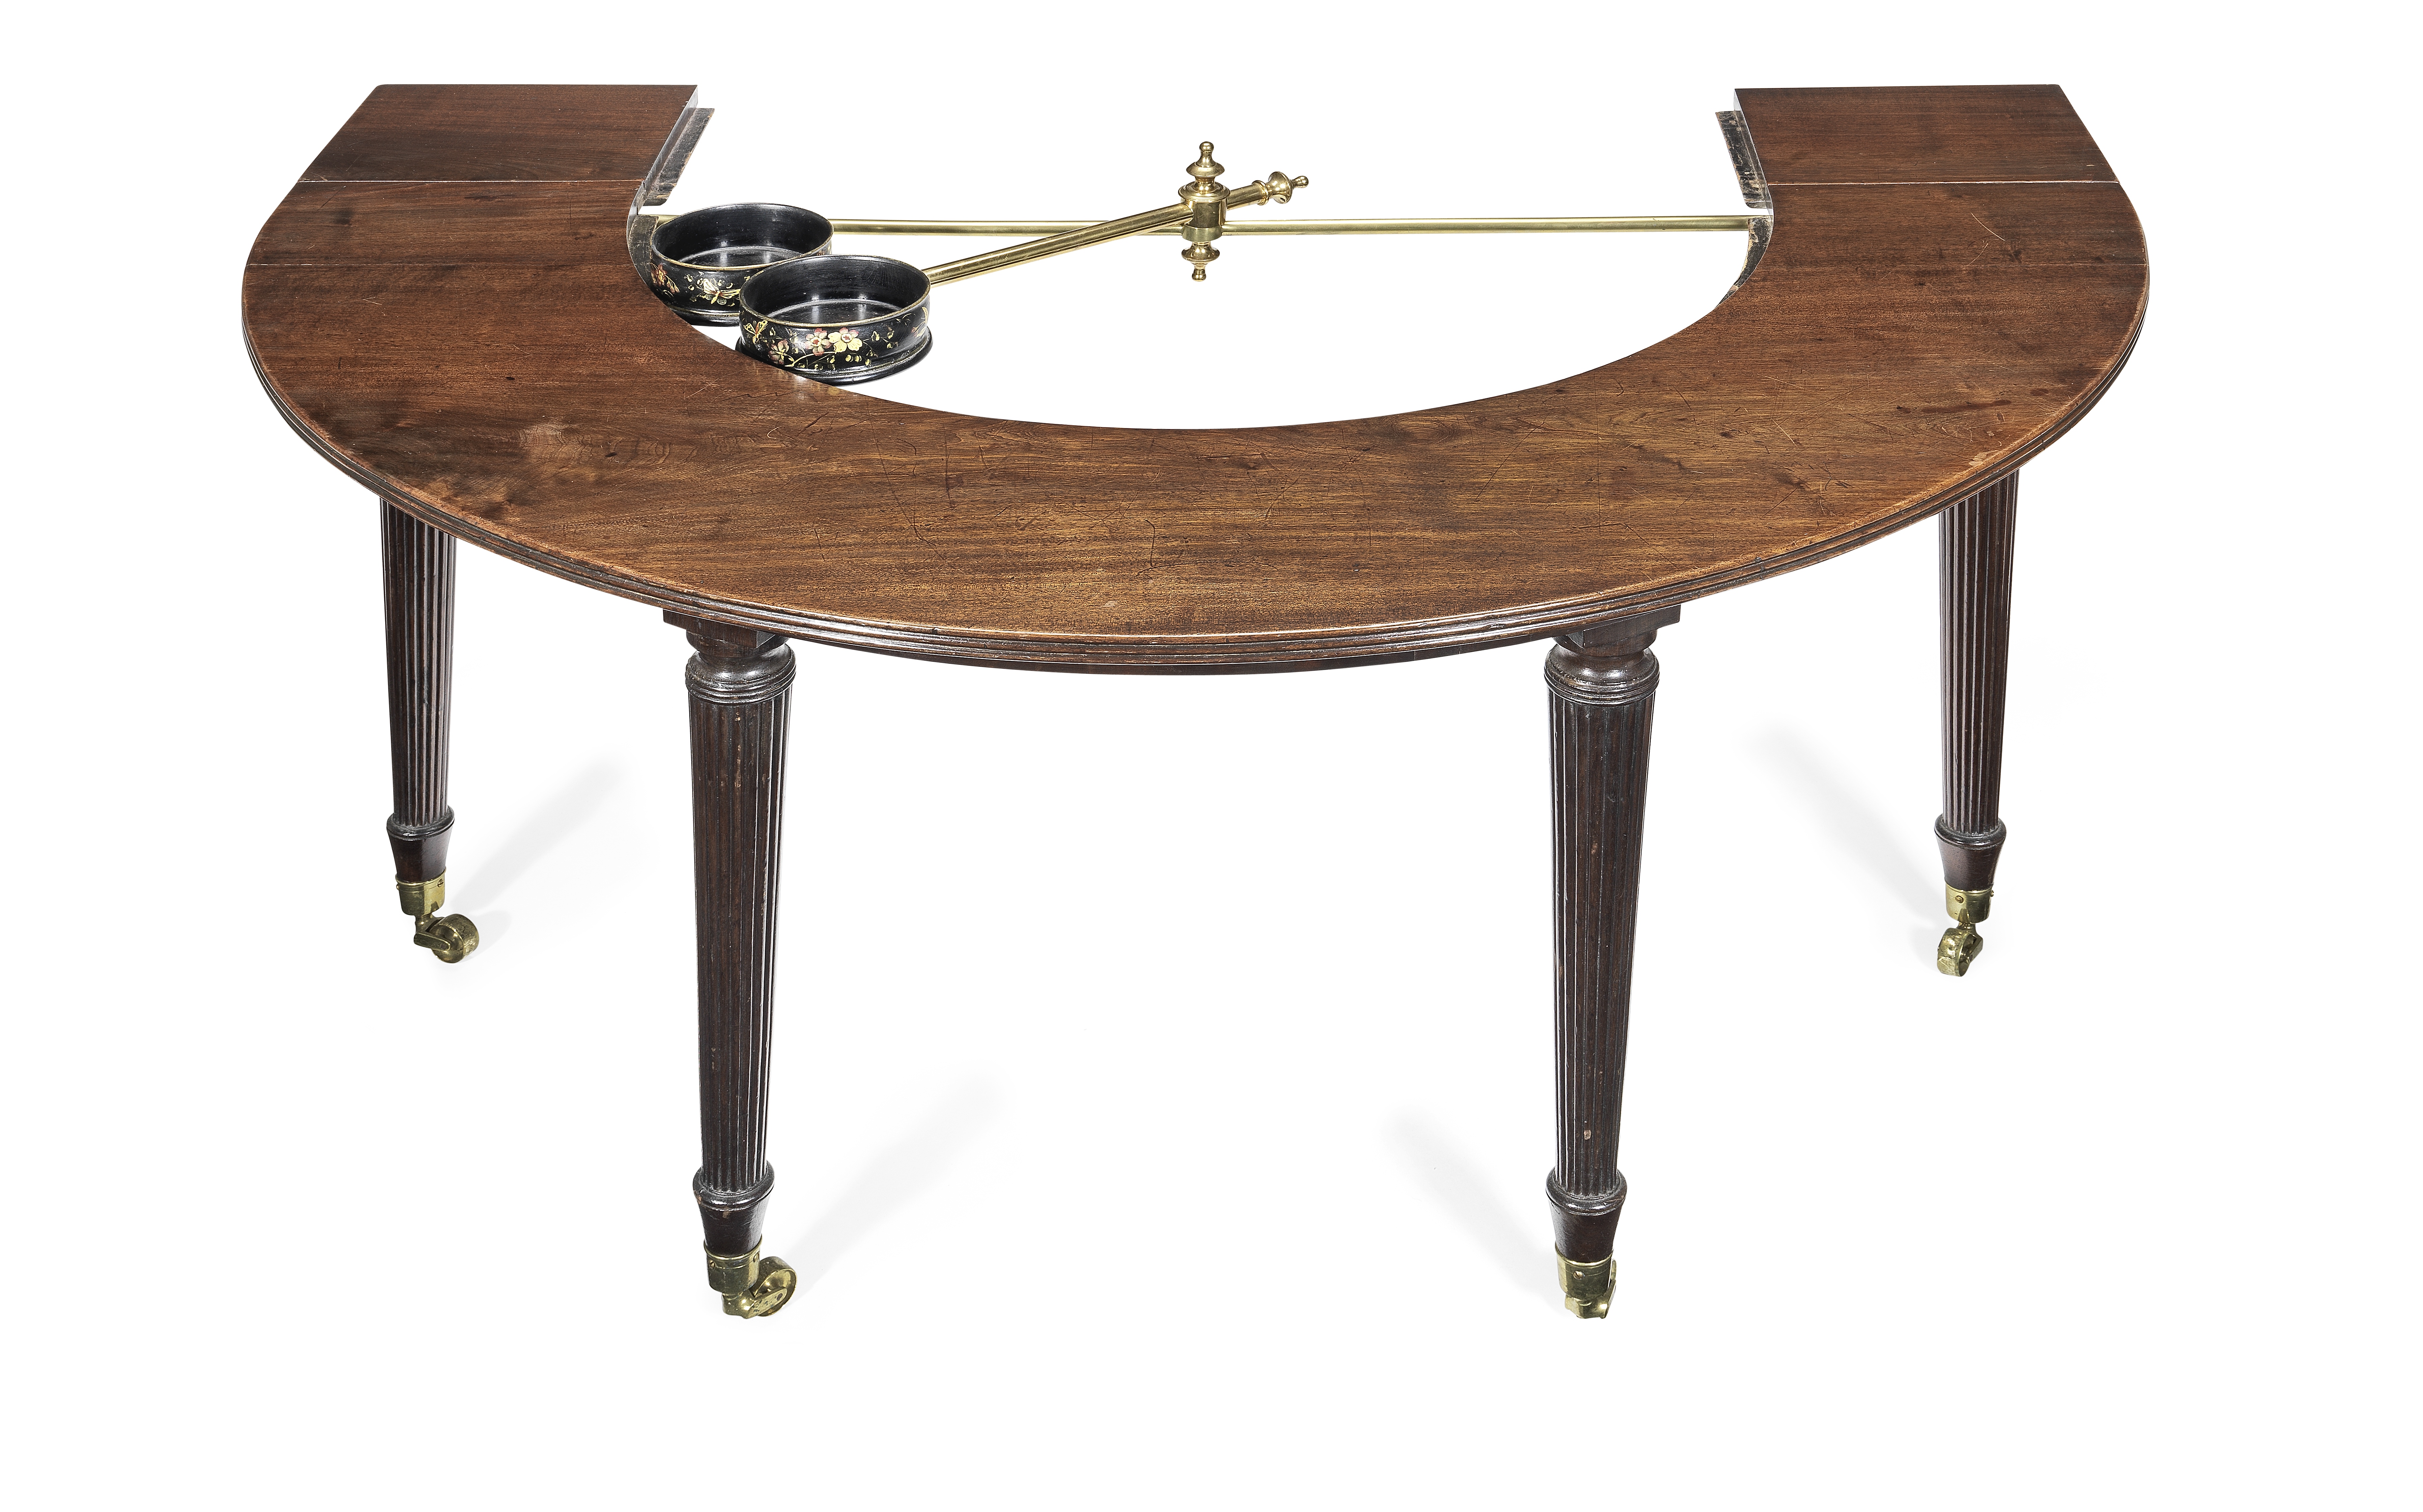 A Regency mahogany wine, hunt or social table in the manner of Gillows - Image 4 of 6